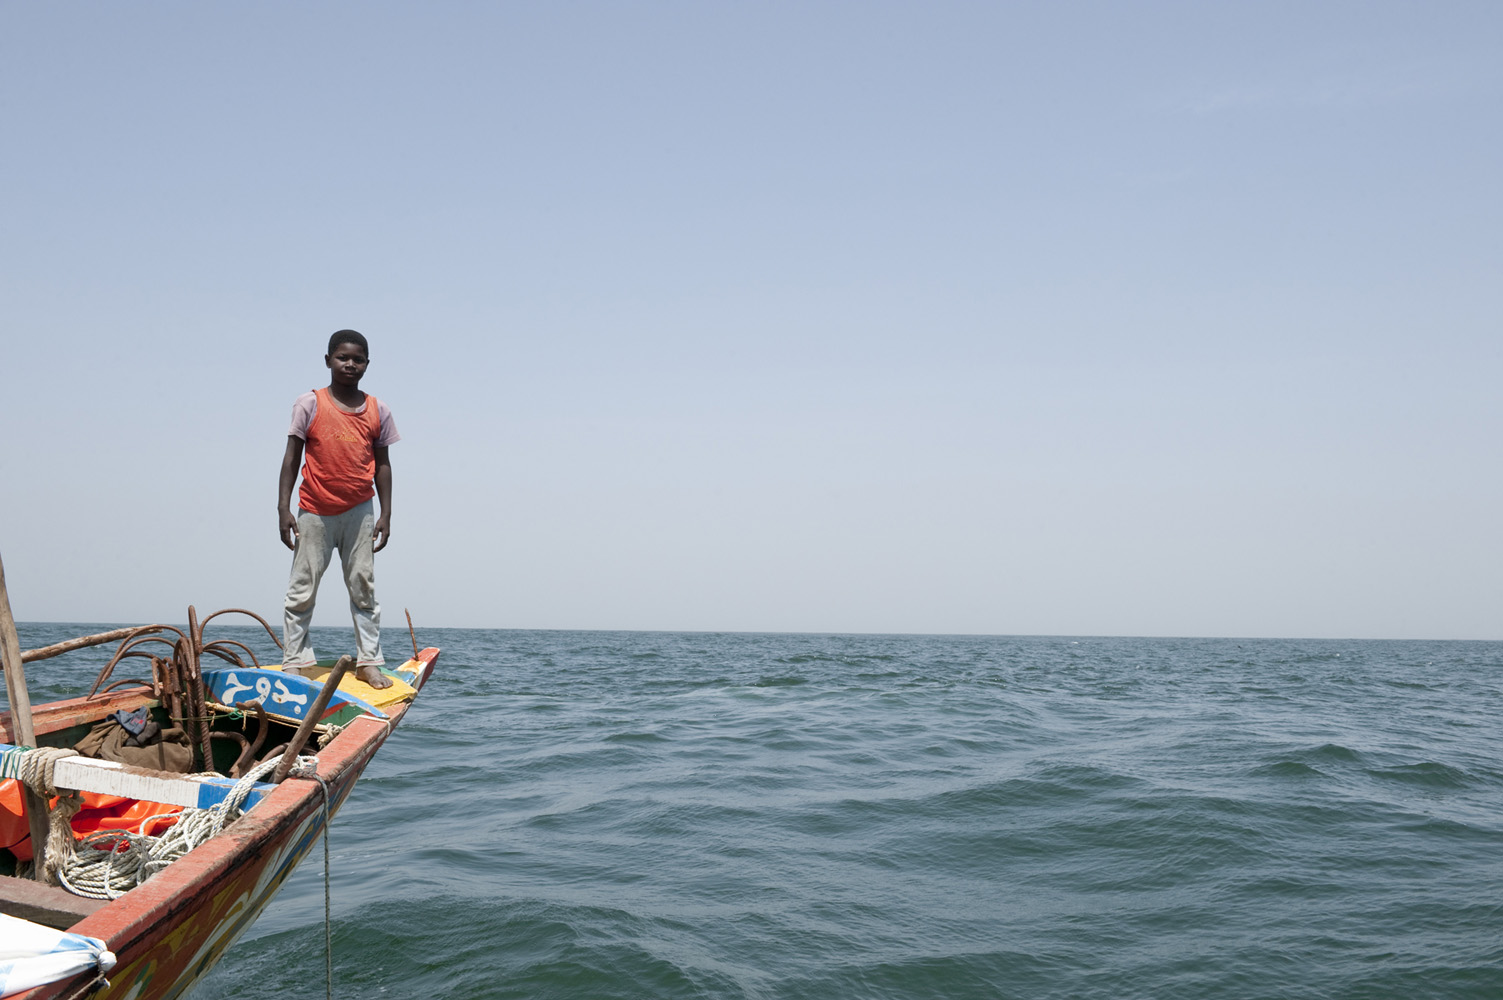 Atlantic Ocean, Senegal, 18 March  2010 Young boy on the Senegalese Pirogue fishing boat 'Sophie Fall' 46 nautical miles offshore, out fishing for 10 days.